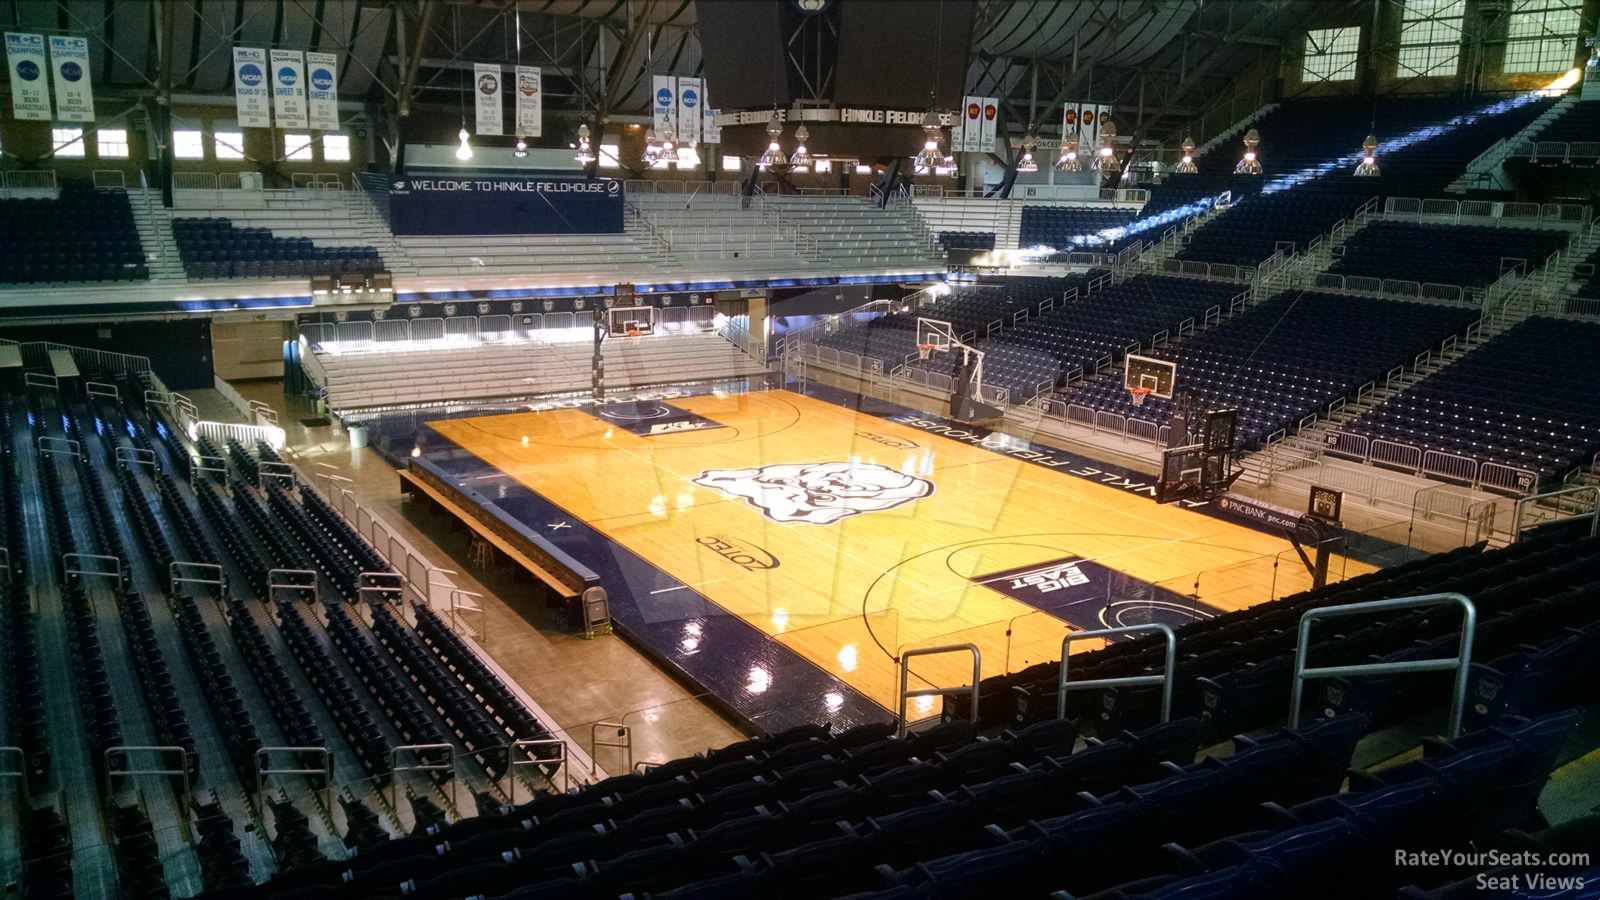 section 202, row 10 seat view  - hinkle fieldhouse